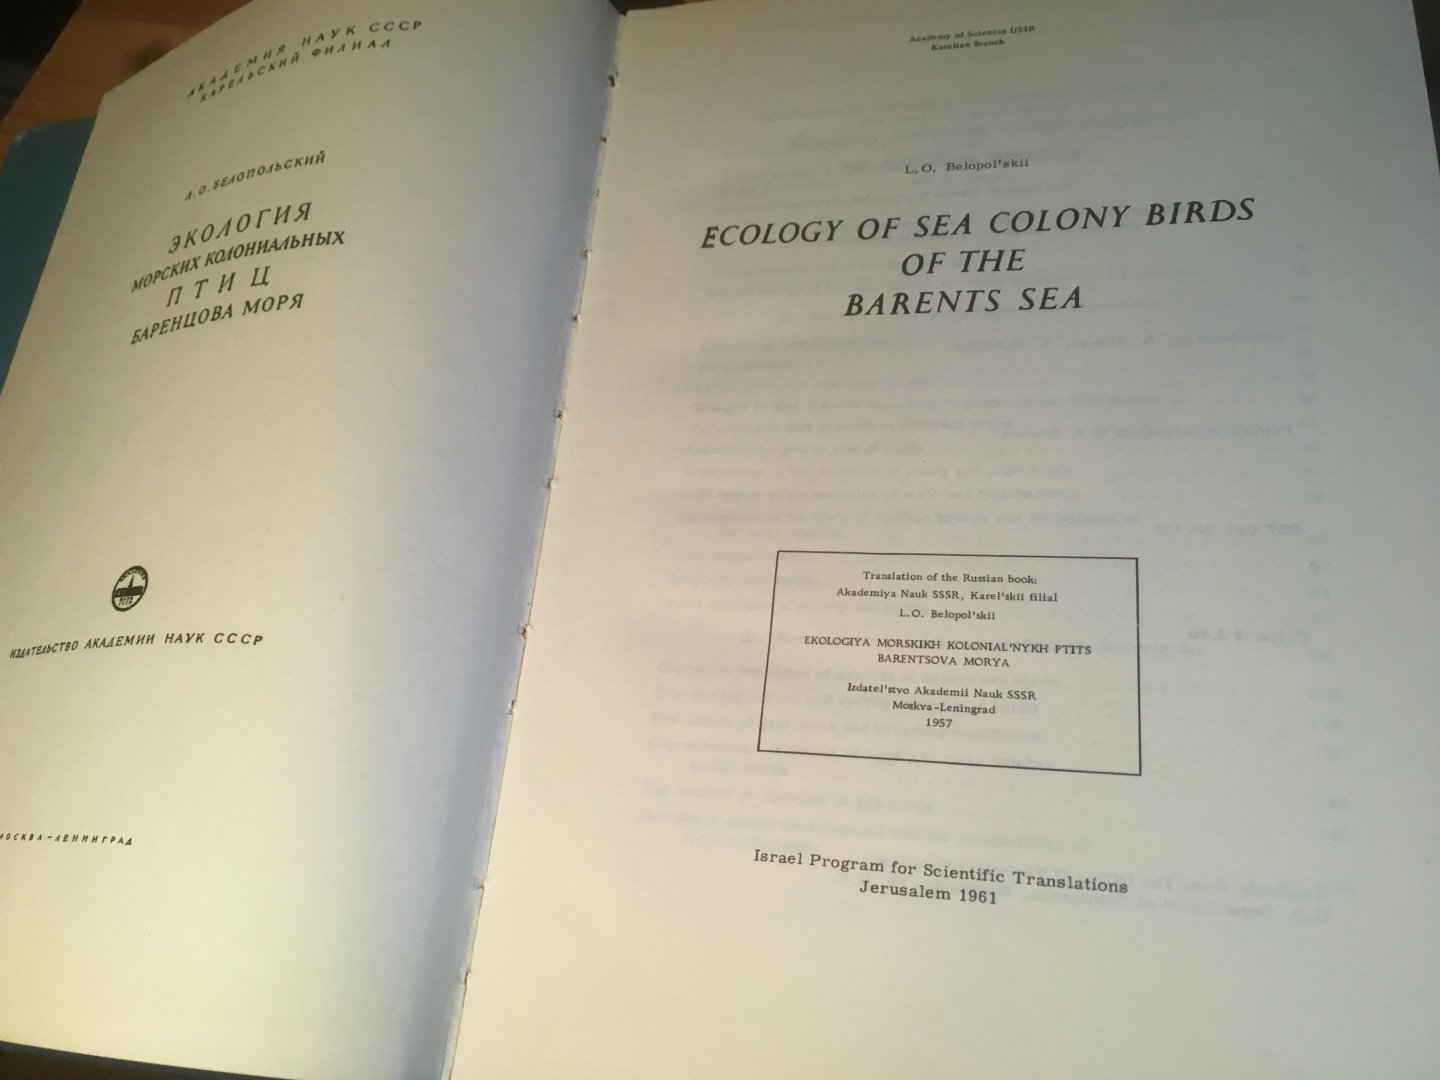 Belopol'skii, LO - Ecology of Sea Colony Birds of the Barents Sea